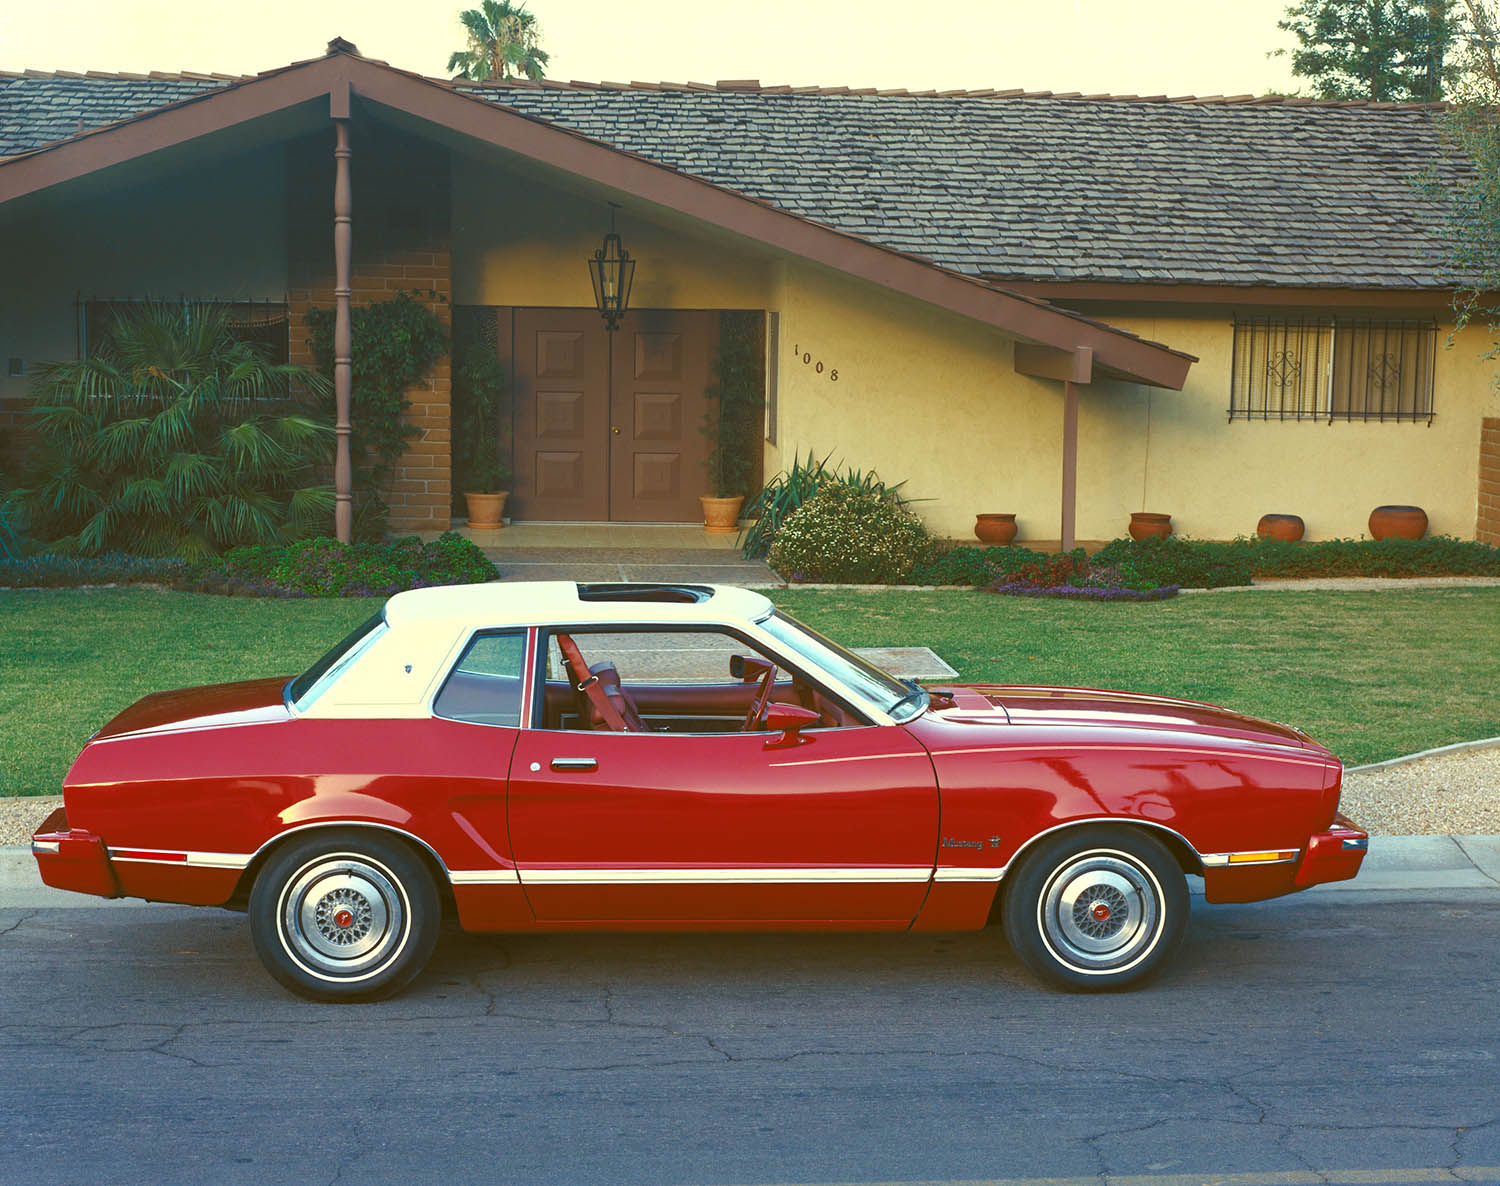 1974 Ford Mustang II in red with a white landau roof parked in front of a house